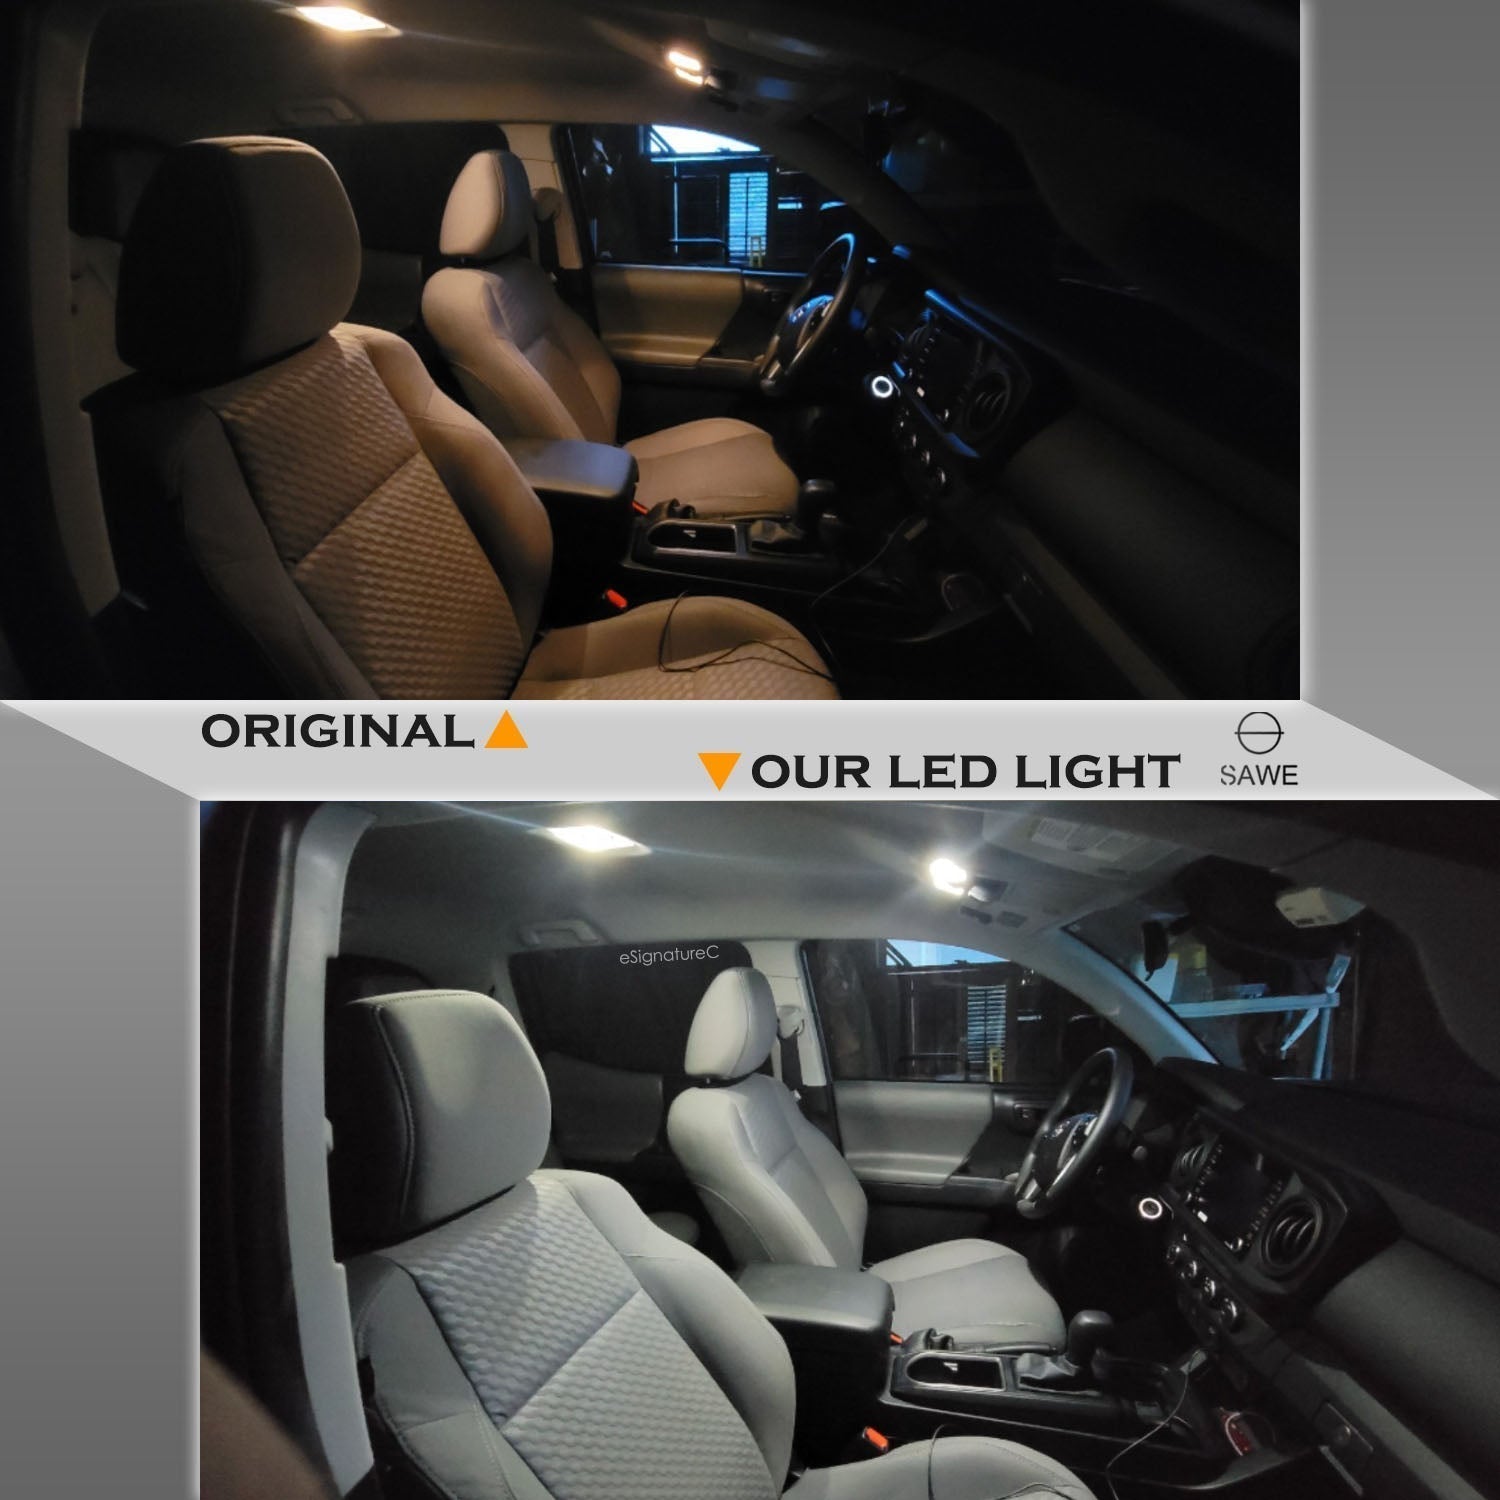 For Chevrolet Tahoe Interior LED Lights - Dome & Map Lights Package Kit for 2000 - 2006 - White